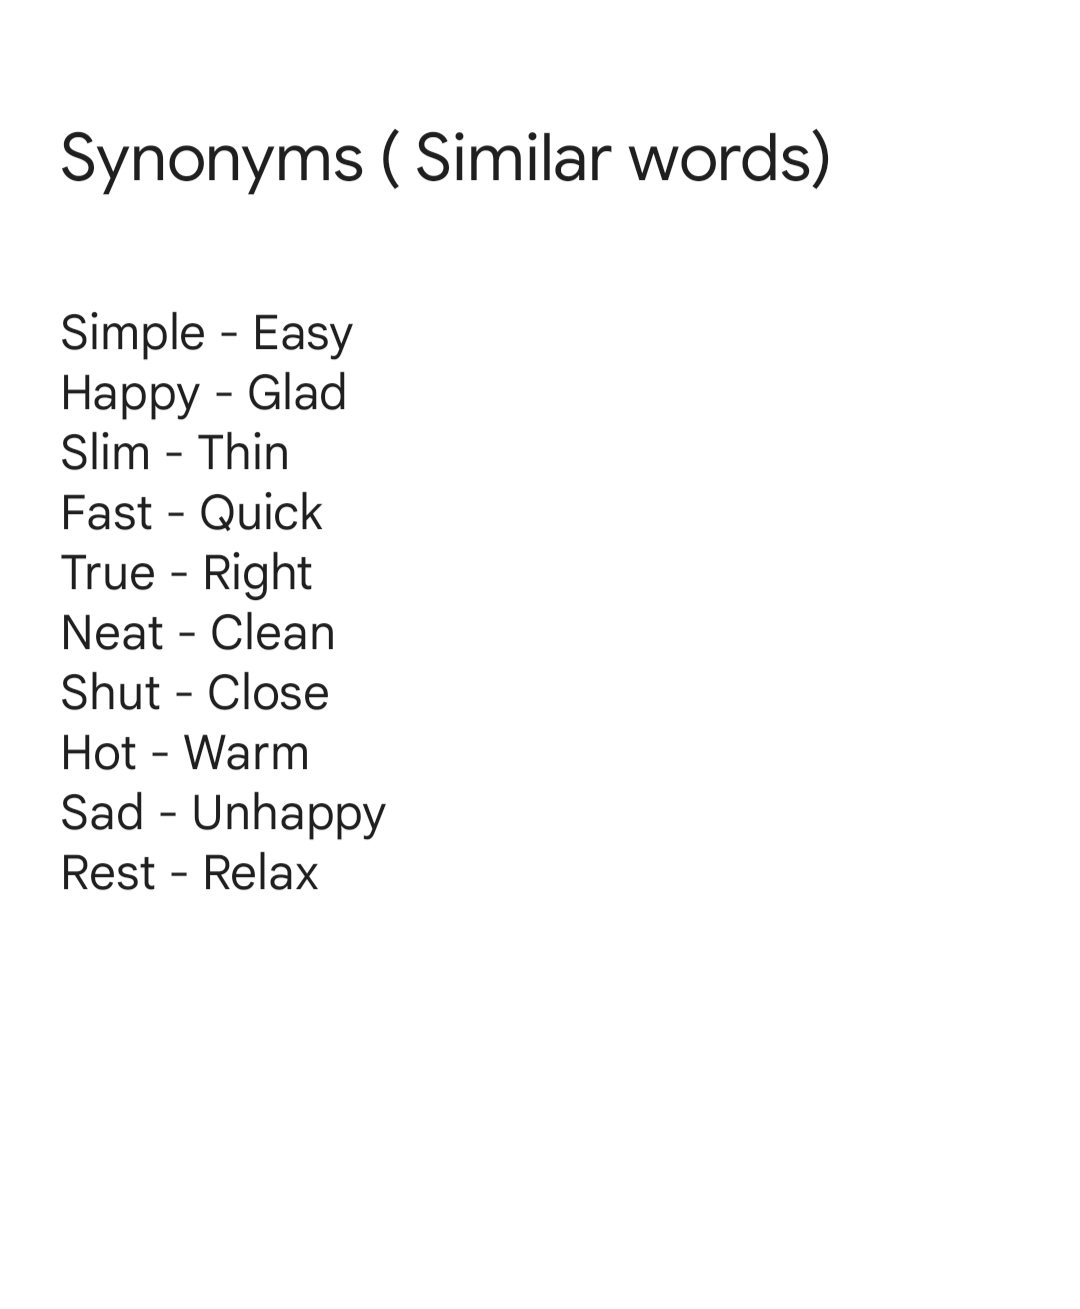 10 Synonyms for Relaxation